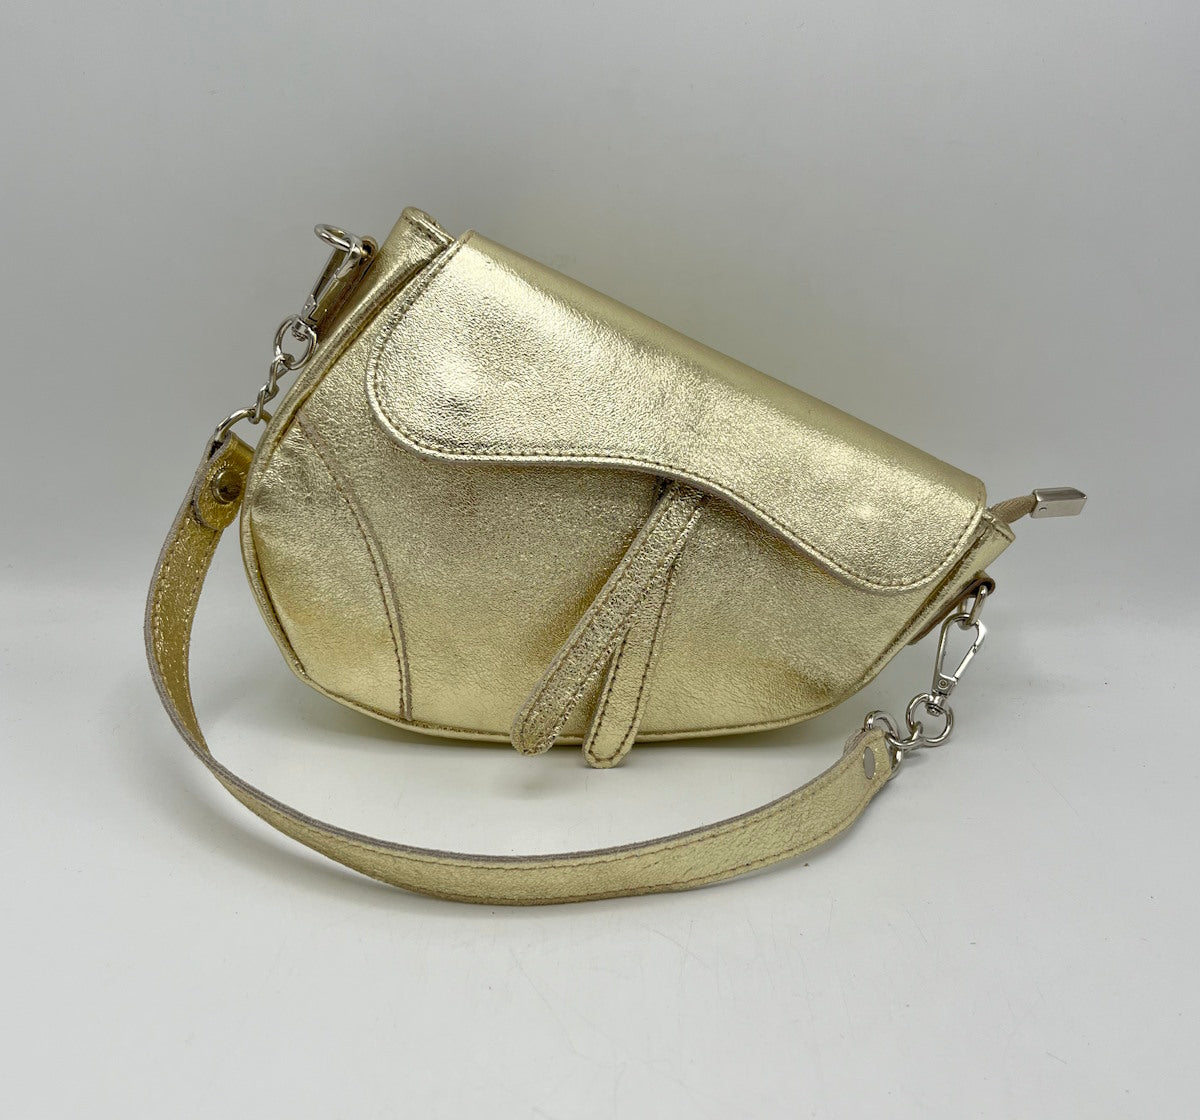 Genuine leather shoulder bag, Made in Italy, art. 112436